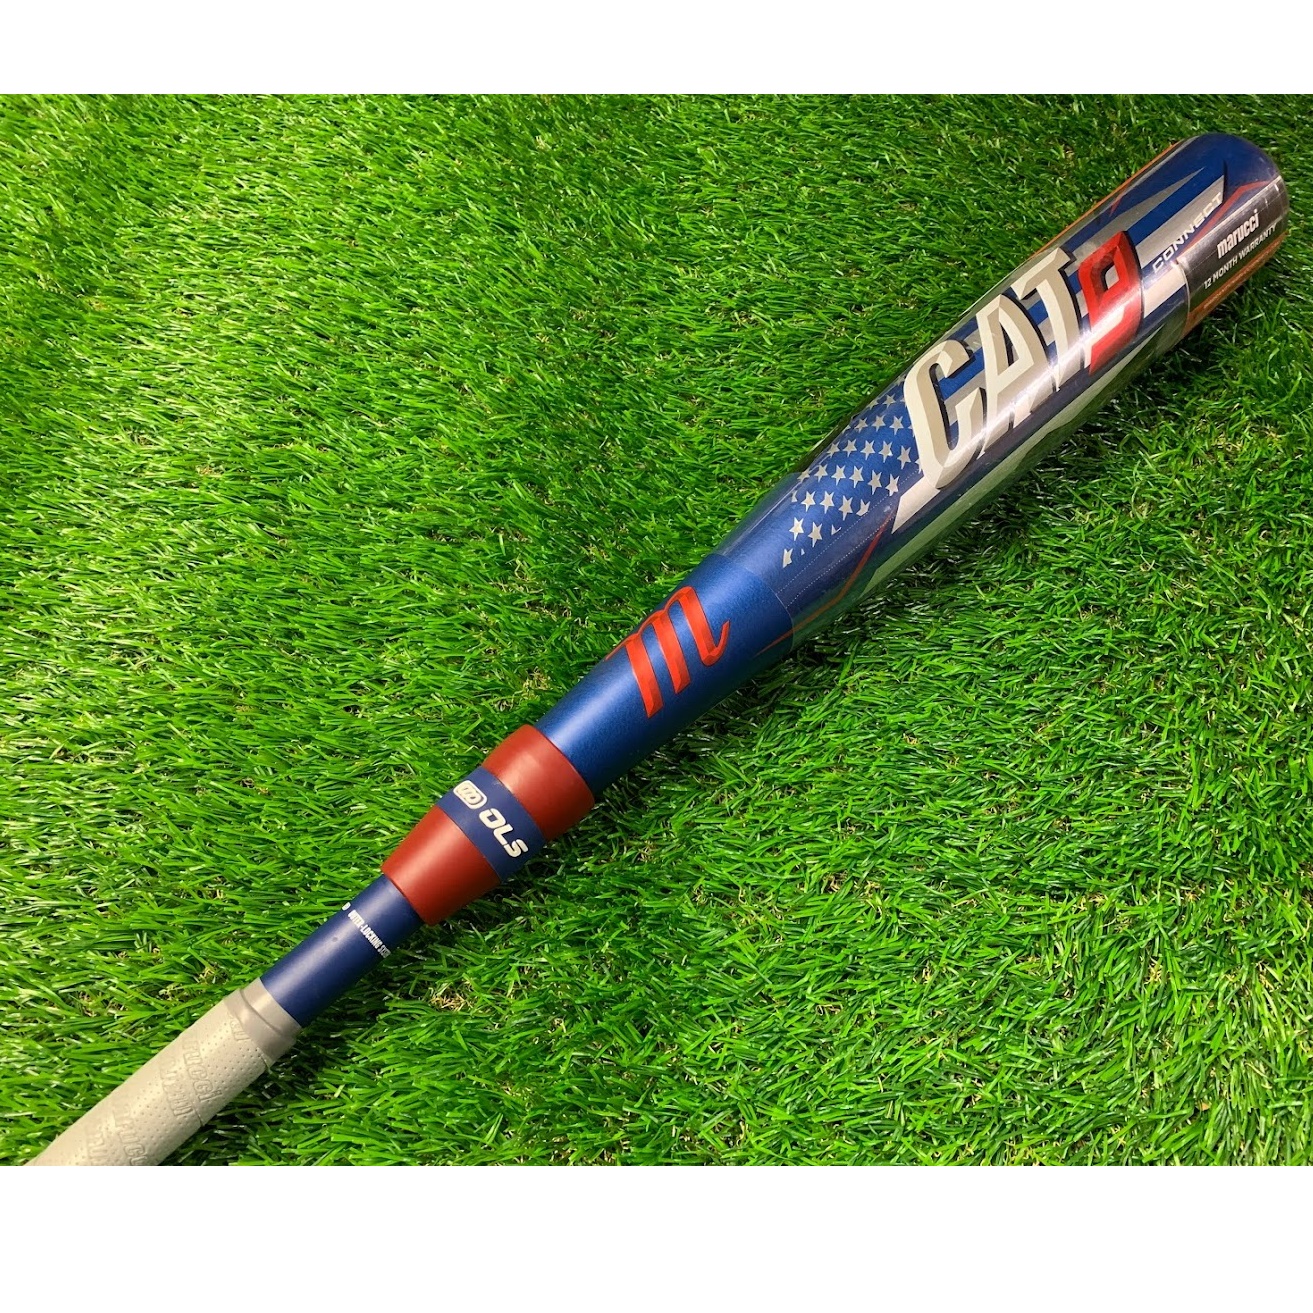 marucci-cat-9-connect-8-pastime-baseball-bat-31-inch-23-oz-demo MSBCC98-3123-DEMO Marucci  Demo bats are a great opportunity to pick up a high